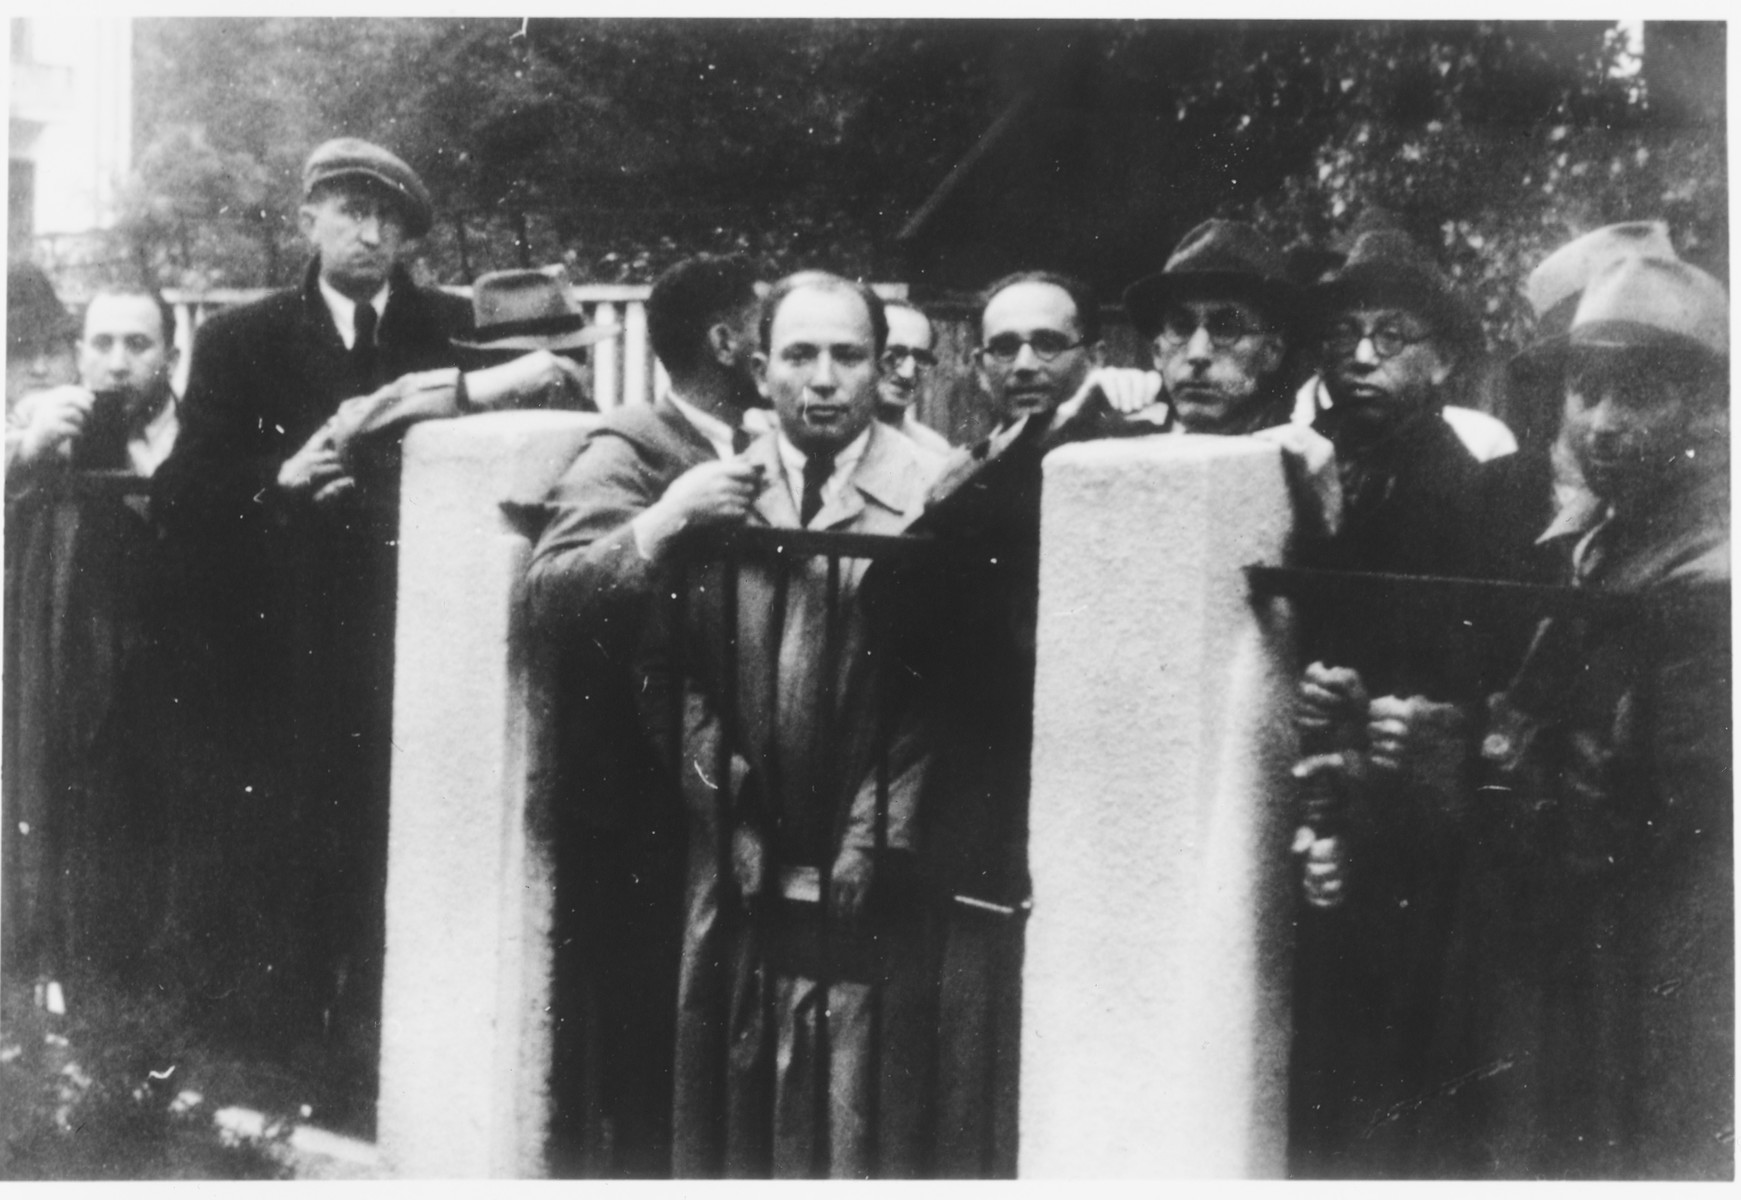 Polish-Jewish refugees lined up outside of the Japanese Consulate waiting for visas from Sugihara.